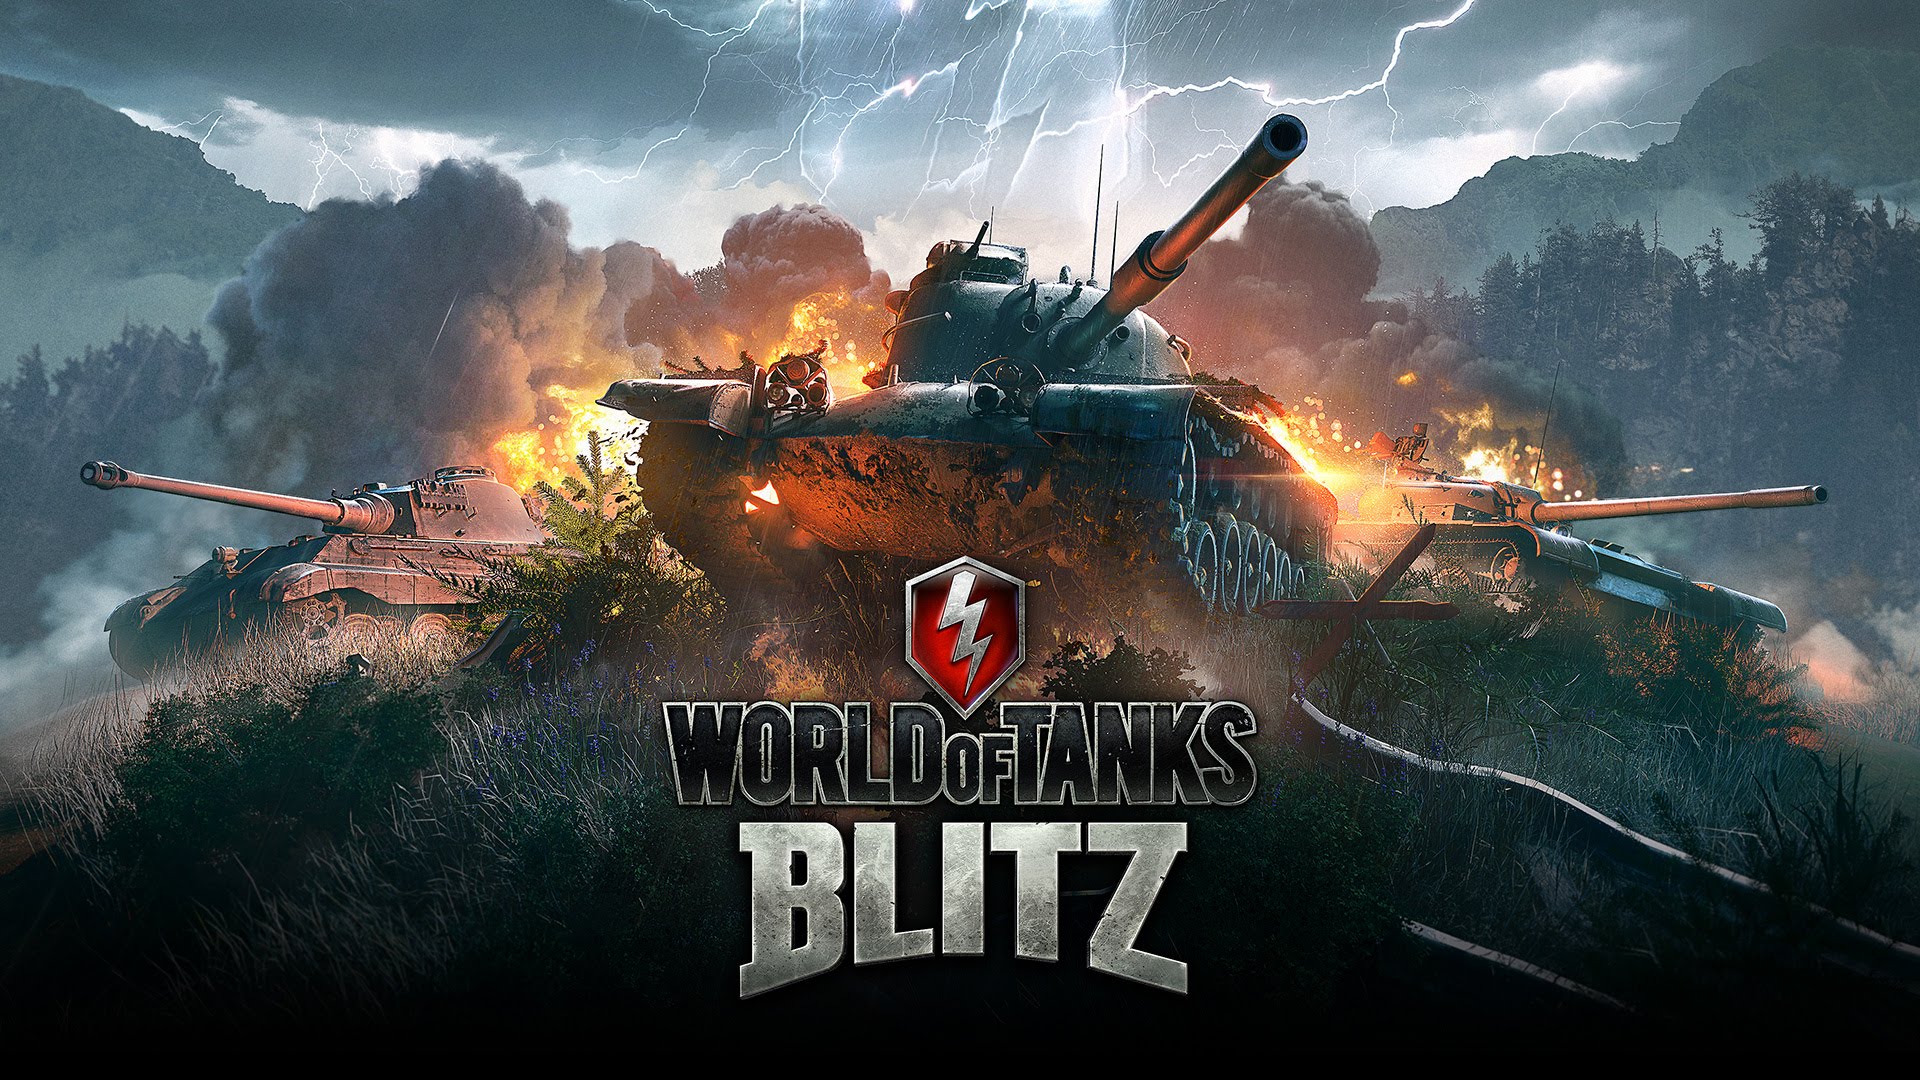 Storm Is Coming Wallpaper From World Of Tanks Blitz